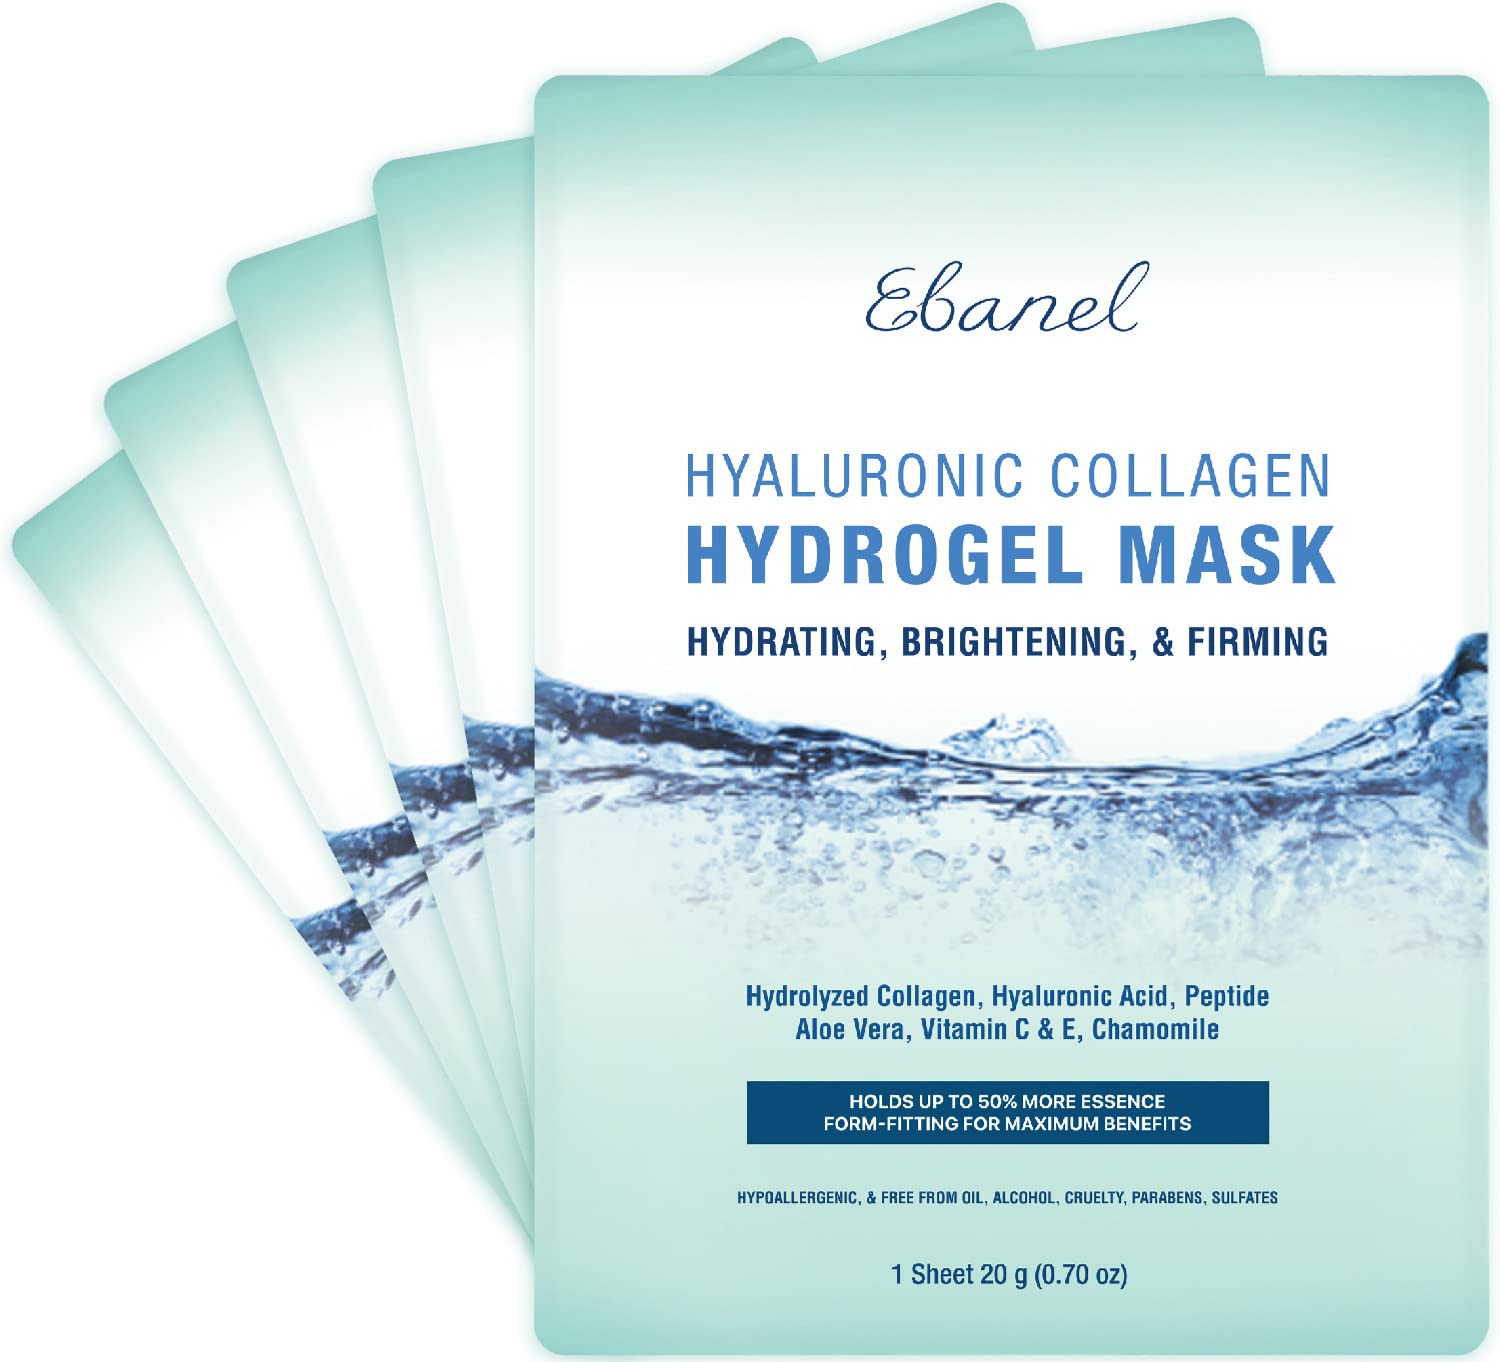 Ebanel 5-Pack Hydrogel Collagen Mask for Face, Instant Brightening Hydrating Face Mask Sheet Mask for Firming, Lifting Anti Aging Anti Wrinkle with Hyaluronic Acid, Peptide, Aloe Vera, Vitamin C & E